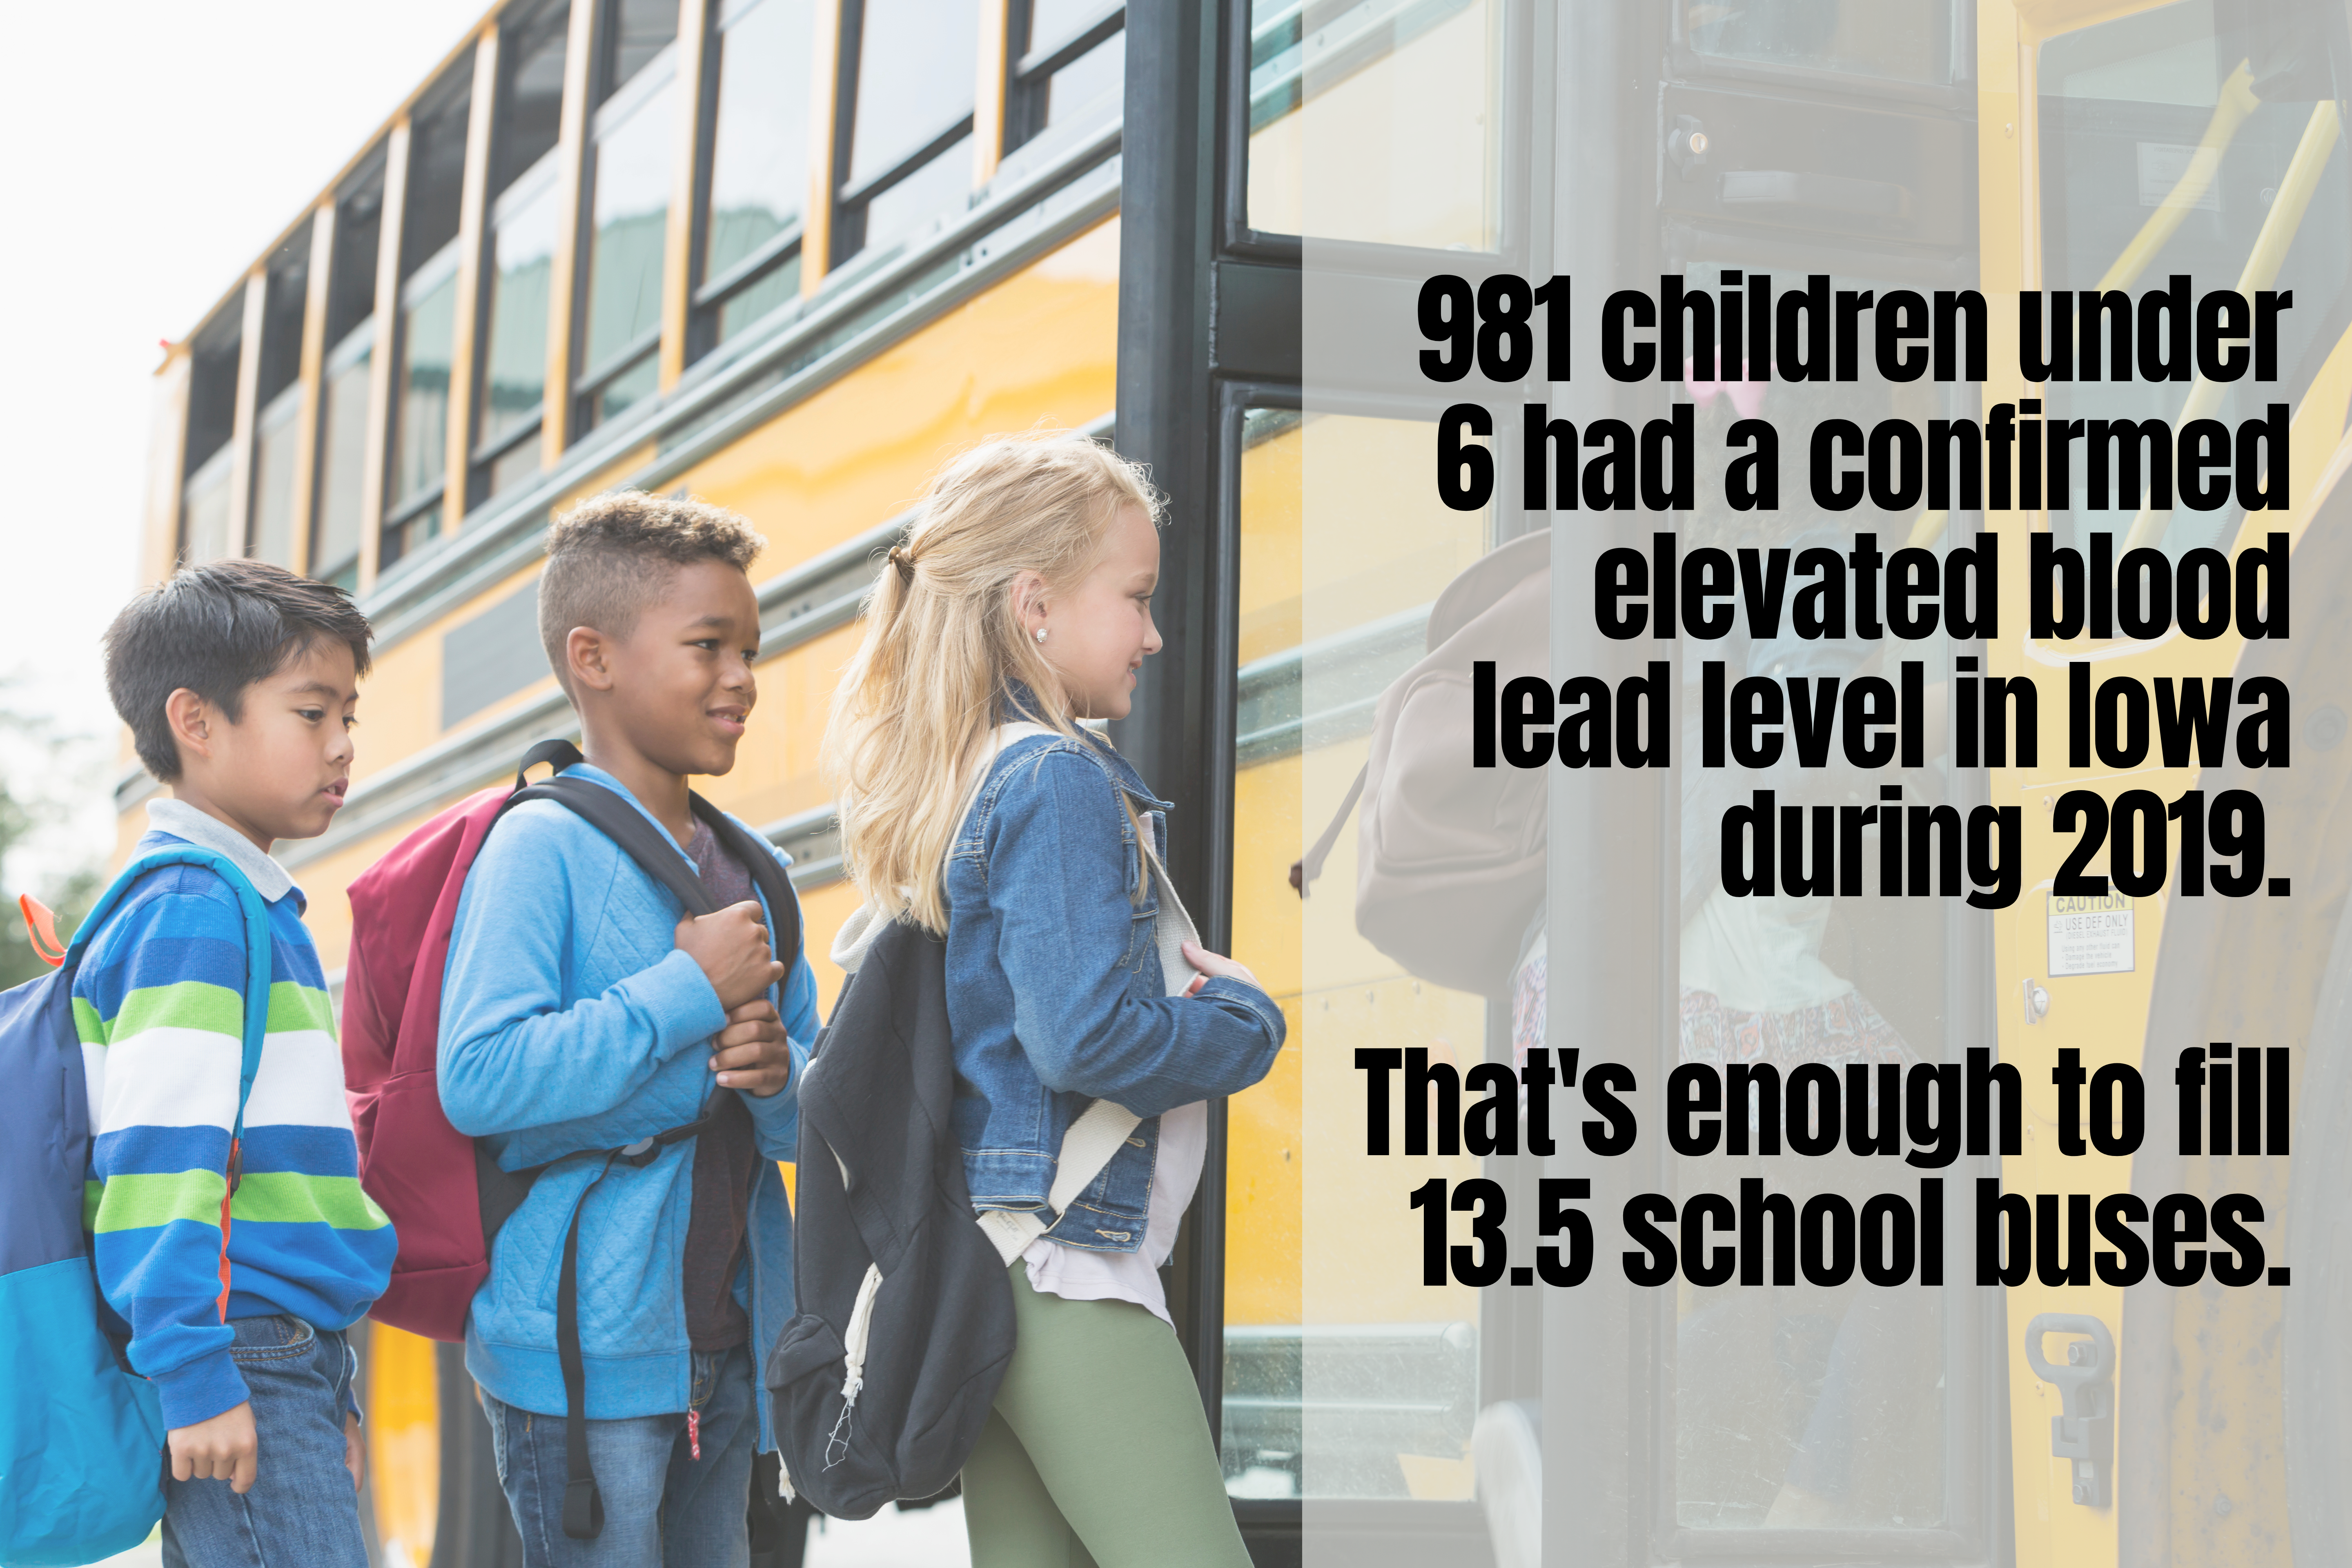 981 children had a confirmed elevated blood lead level in Iowa during 2019